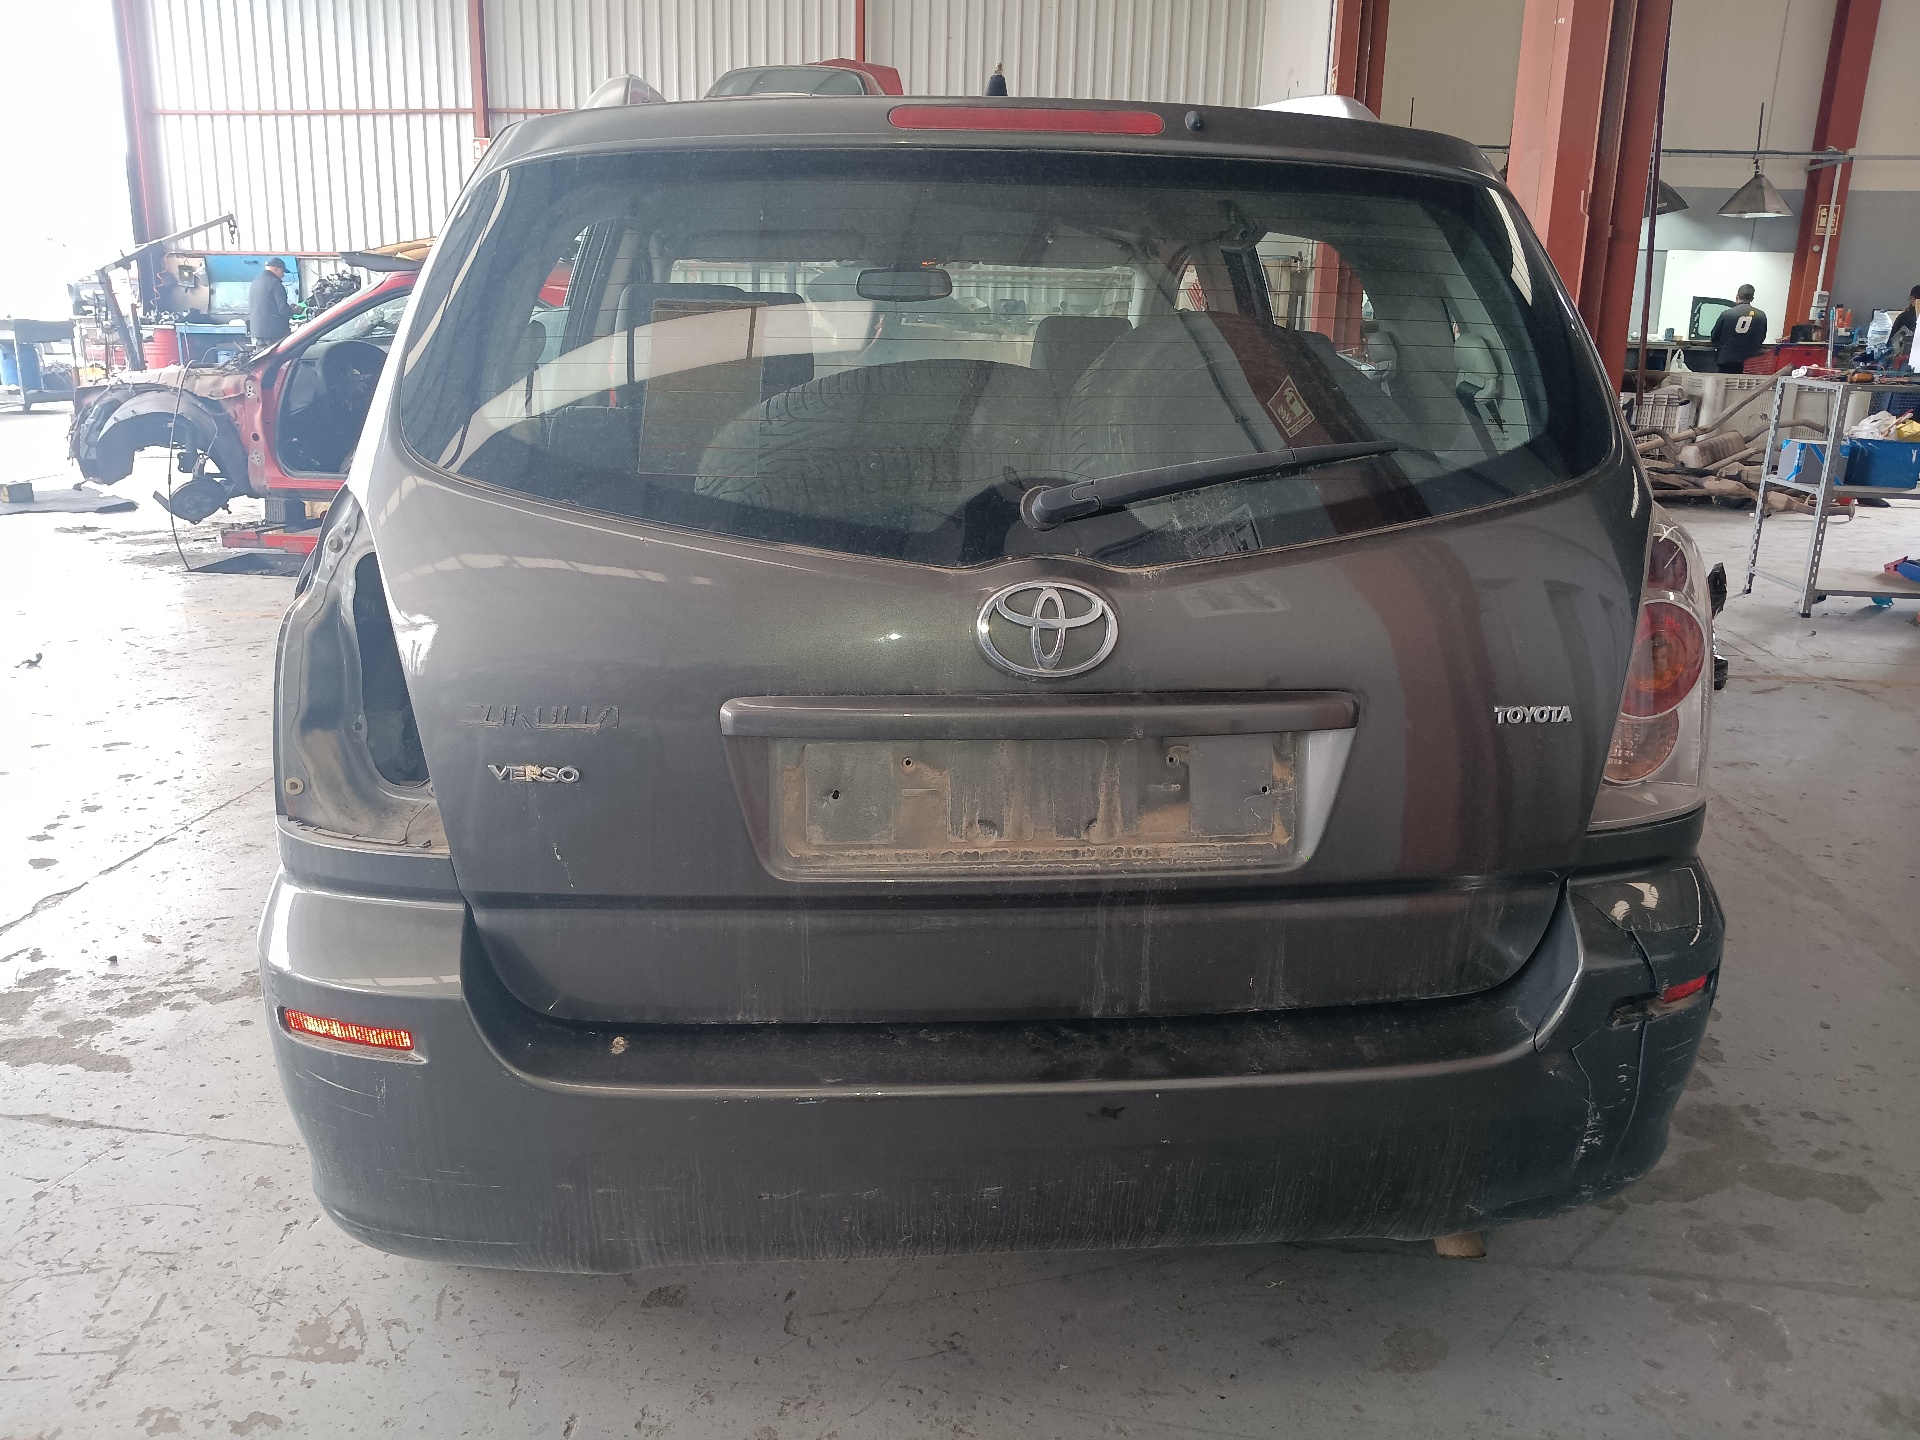 FORD Corolla Verso 1 generation (2001-2009) ABS blokas 895410F010 23778120